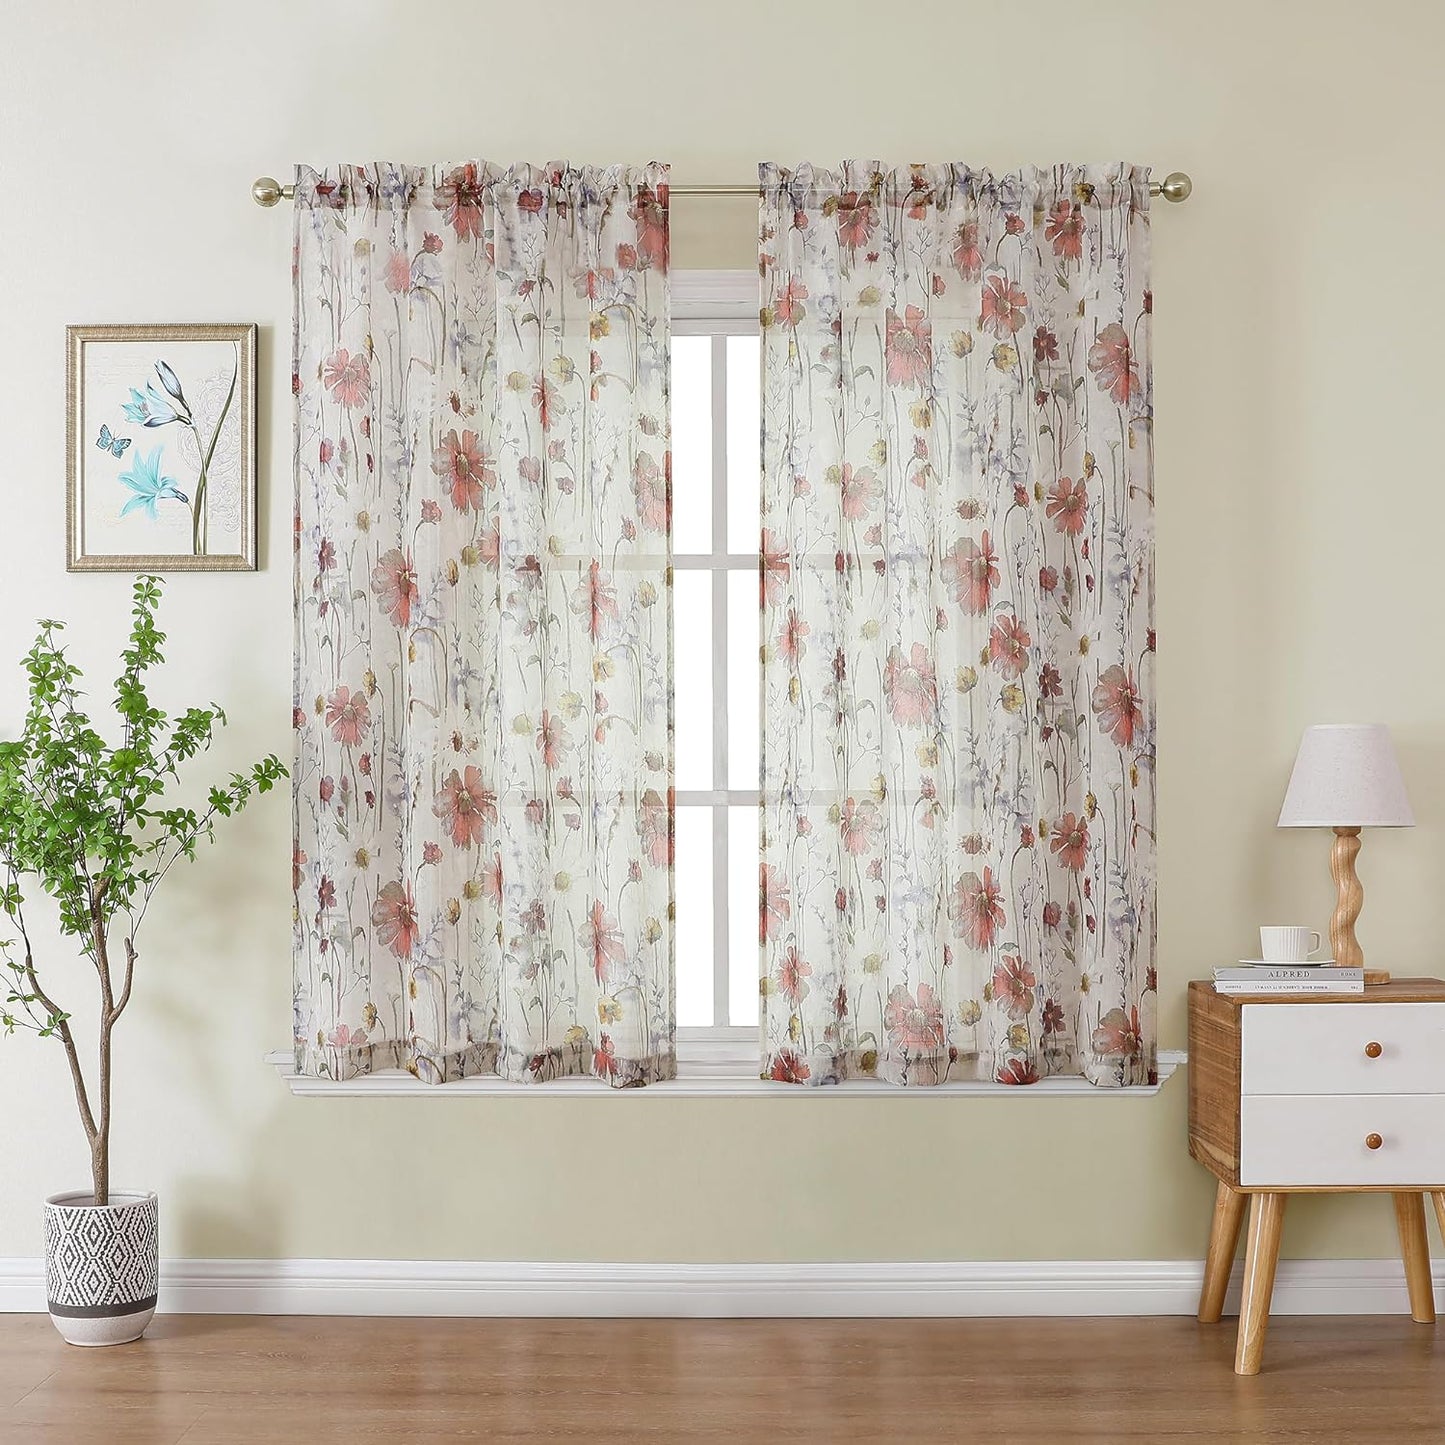 OWENIE Crushed Semi Sheer Curtains 72 Inches Length 2 Panels, Floral Pattern Design Rod Pocket Light Filtering Farmhouse Curtains for Bedroom Living Room, 2 Pieces Total 84 Inch Wide, 72 Inch Long  OWENIE Multi Color 42"Wx45"L | 2Pcs 